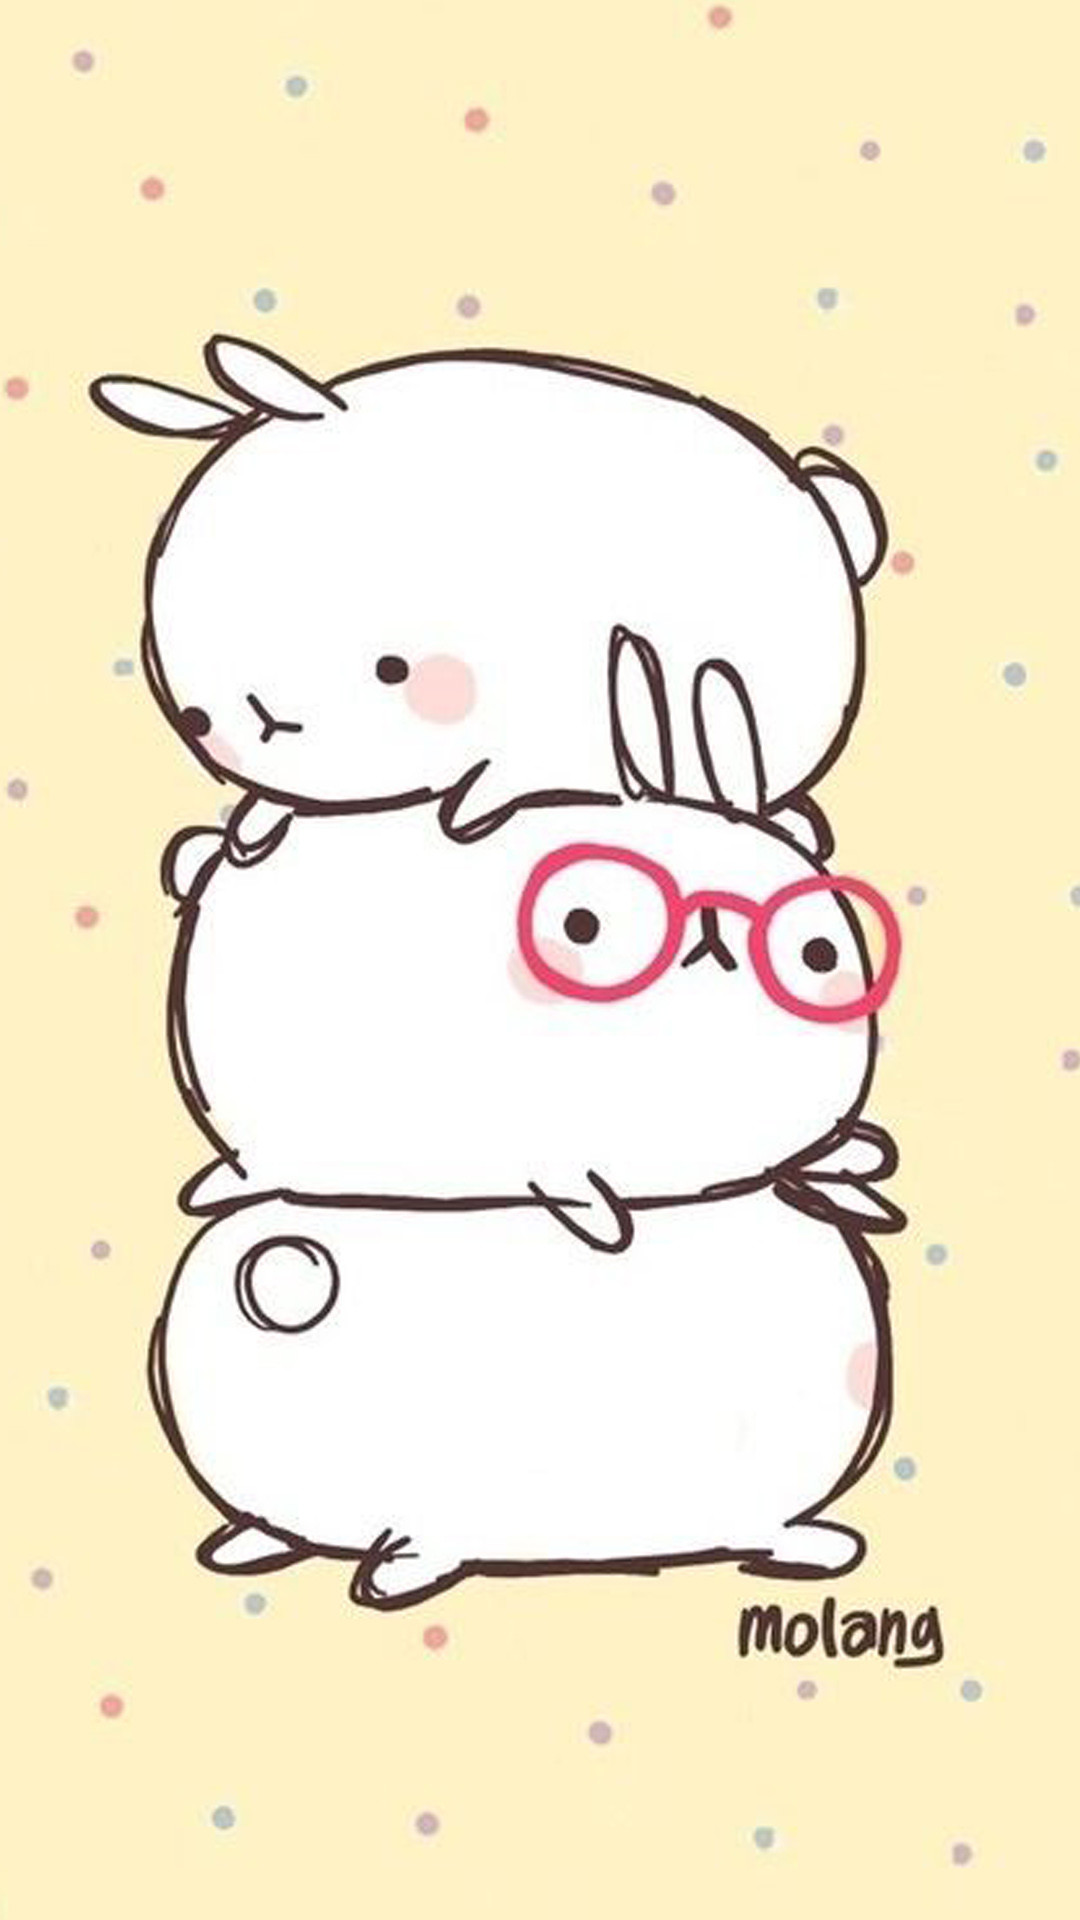 1080x1920 ...  Desktop Cute Cartoon For Iphone Quality With Wallpaper Hd Of